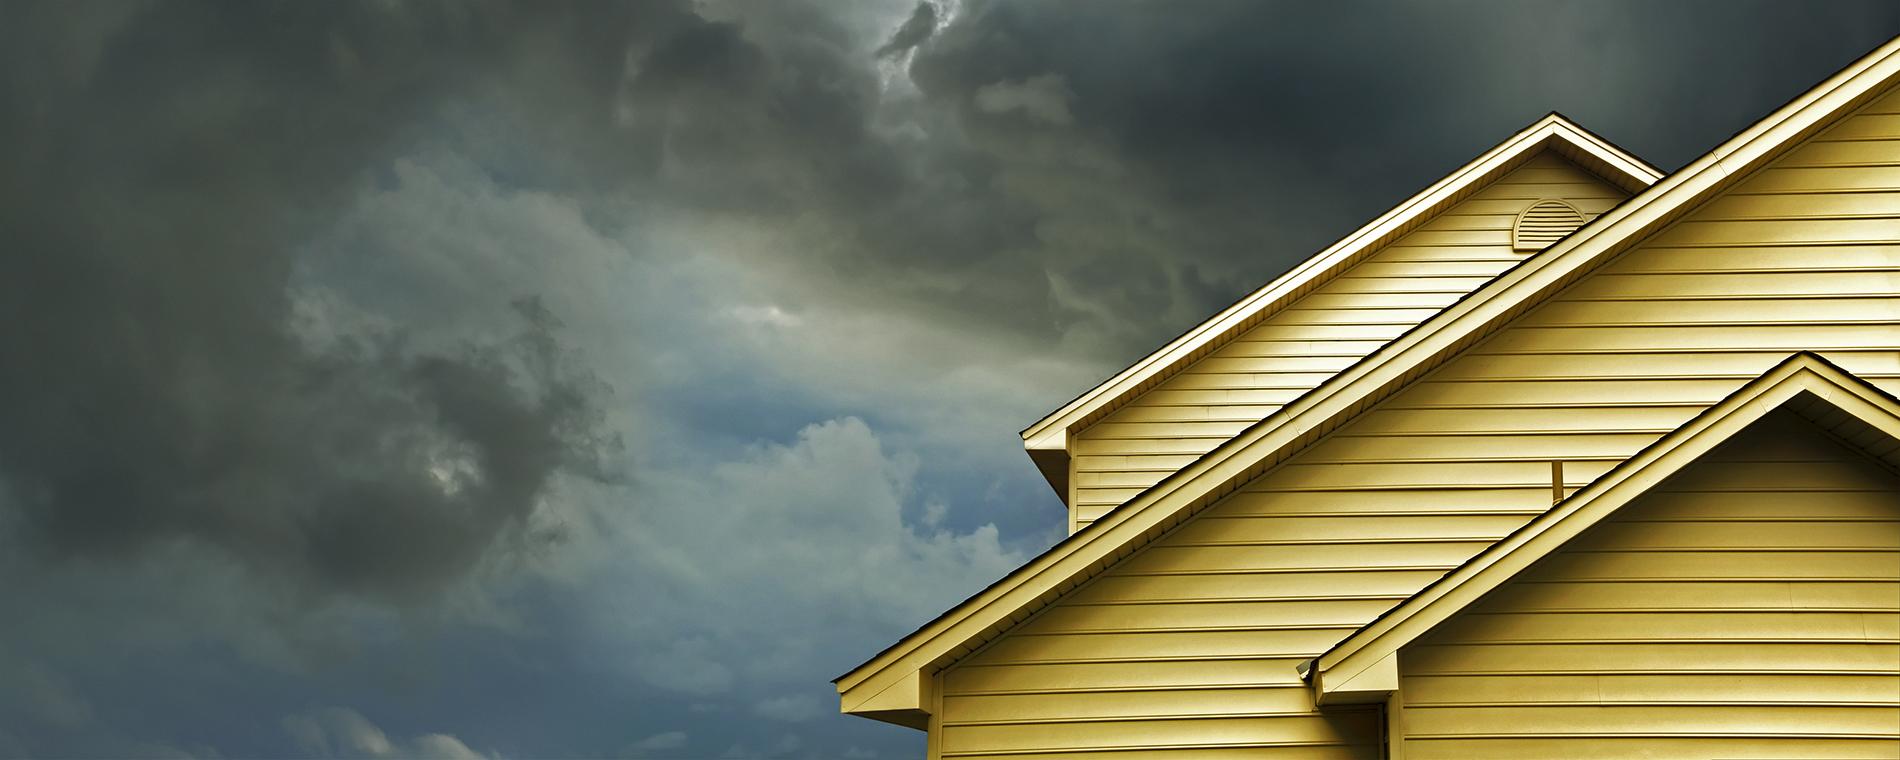 Make sure you have enough coverage to rebuild your house after a tornado